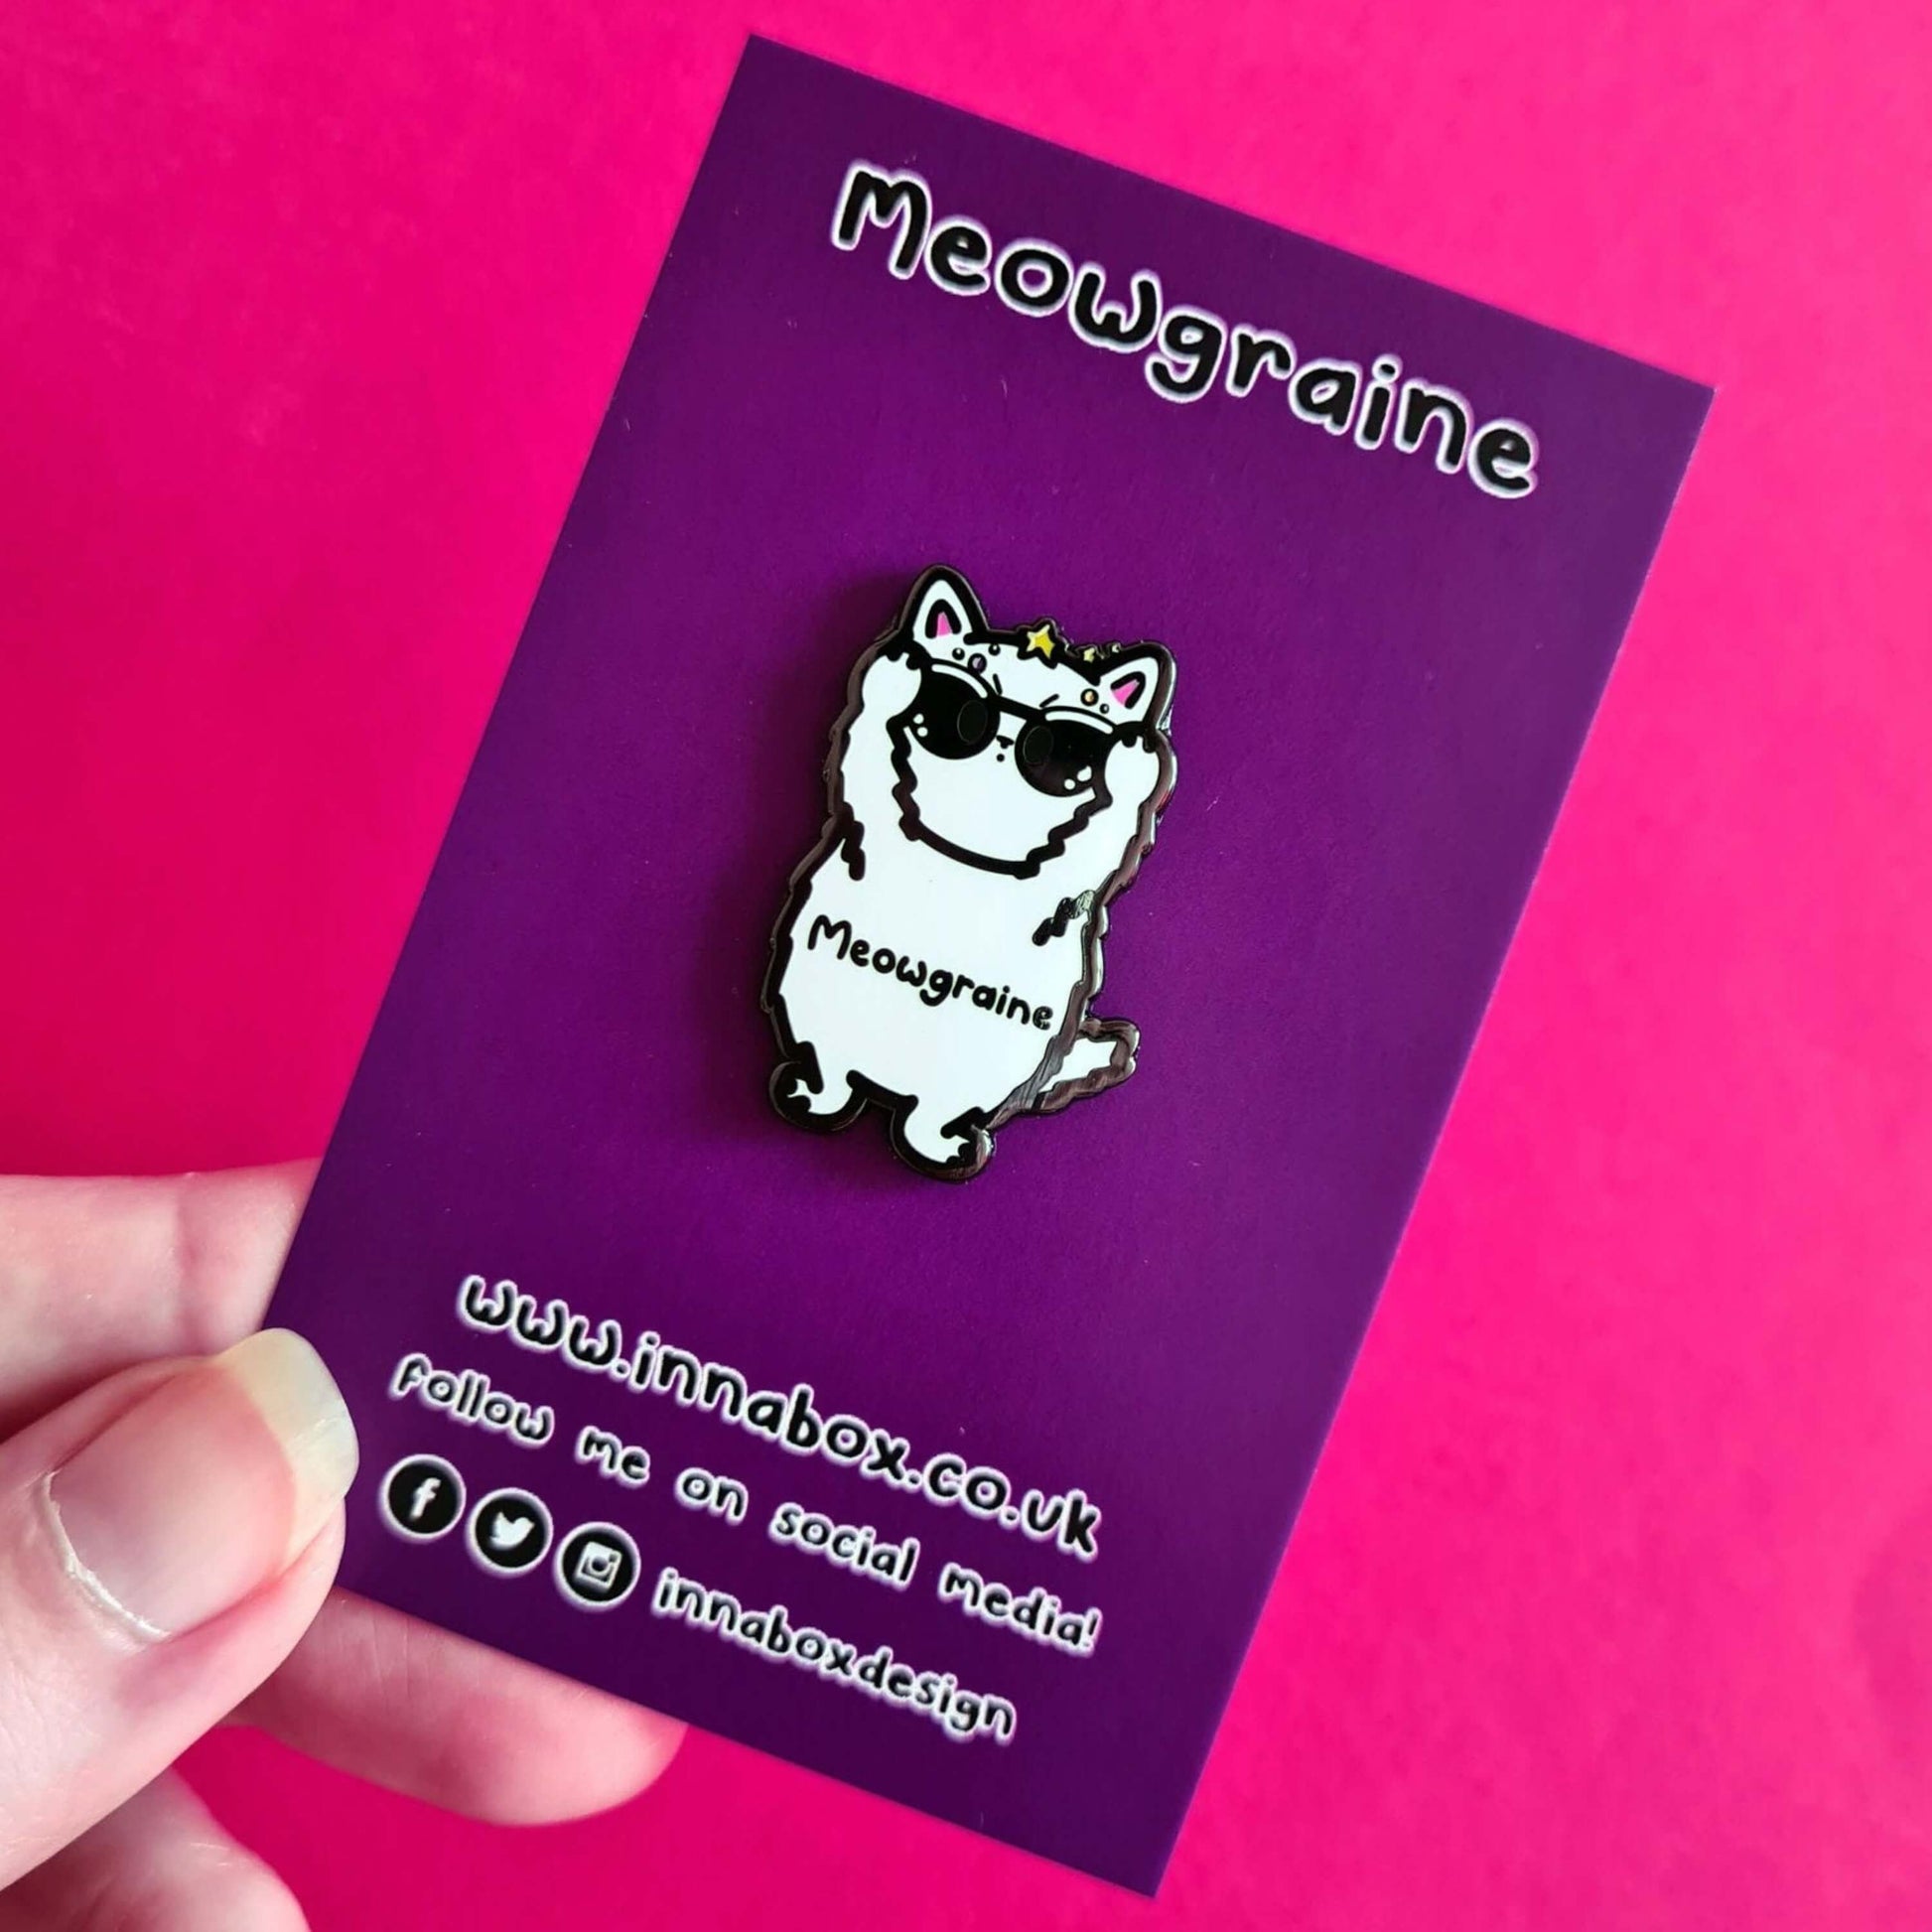 The Meowgraine Cat Enamel Pin - Migraine on purple backing card held over a red background. A white stressed cat clutching a pair of black sunglasses to its eyes with multicoloured spots and stars over its head, across its middle reads 'meowgraine'. The hand drawn design is raising awareness for migraines and headaches.